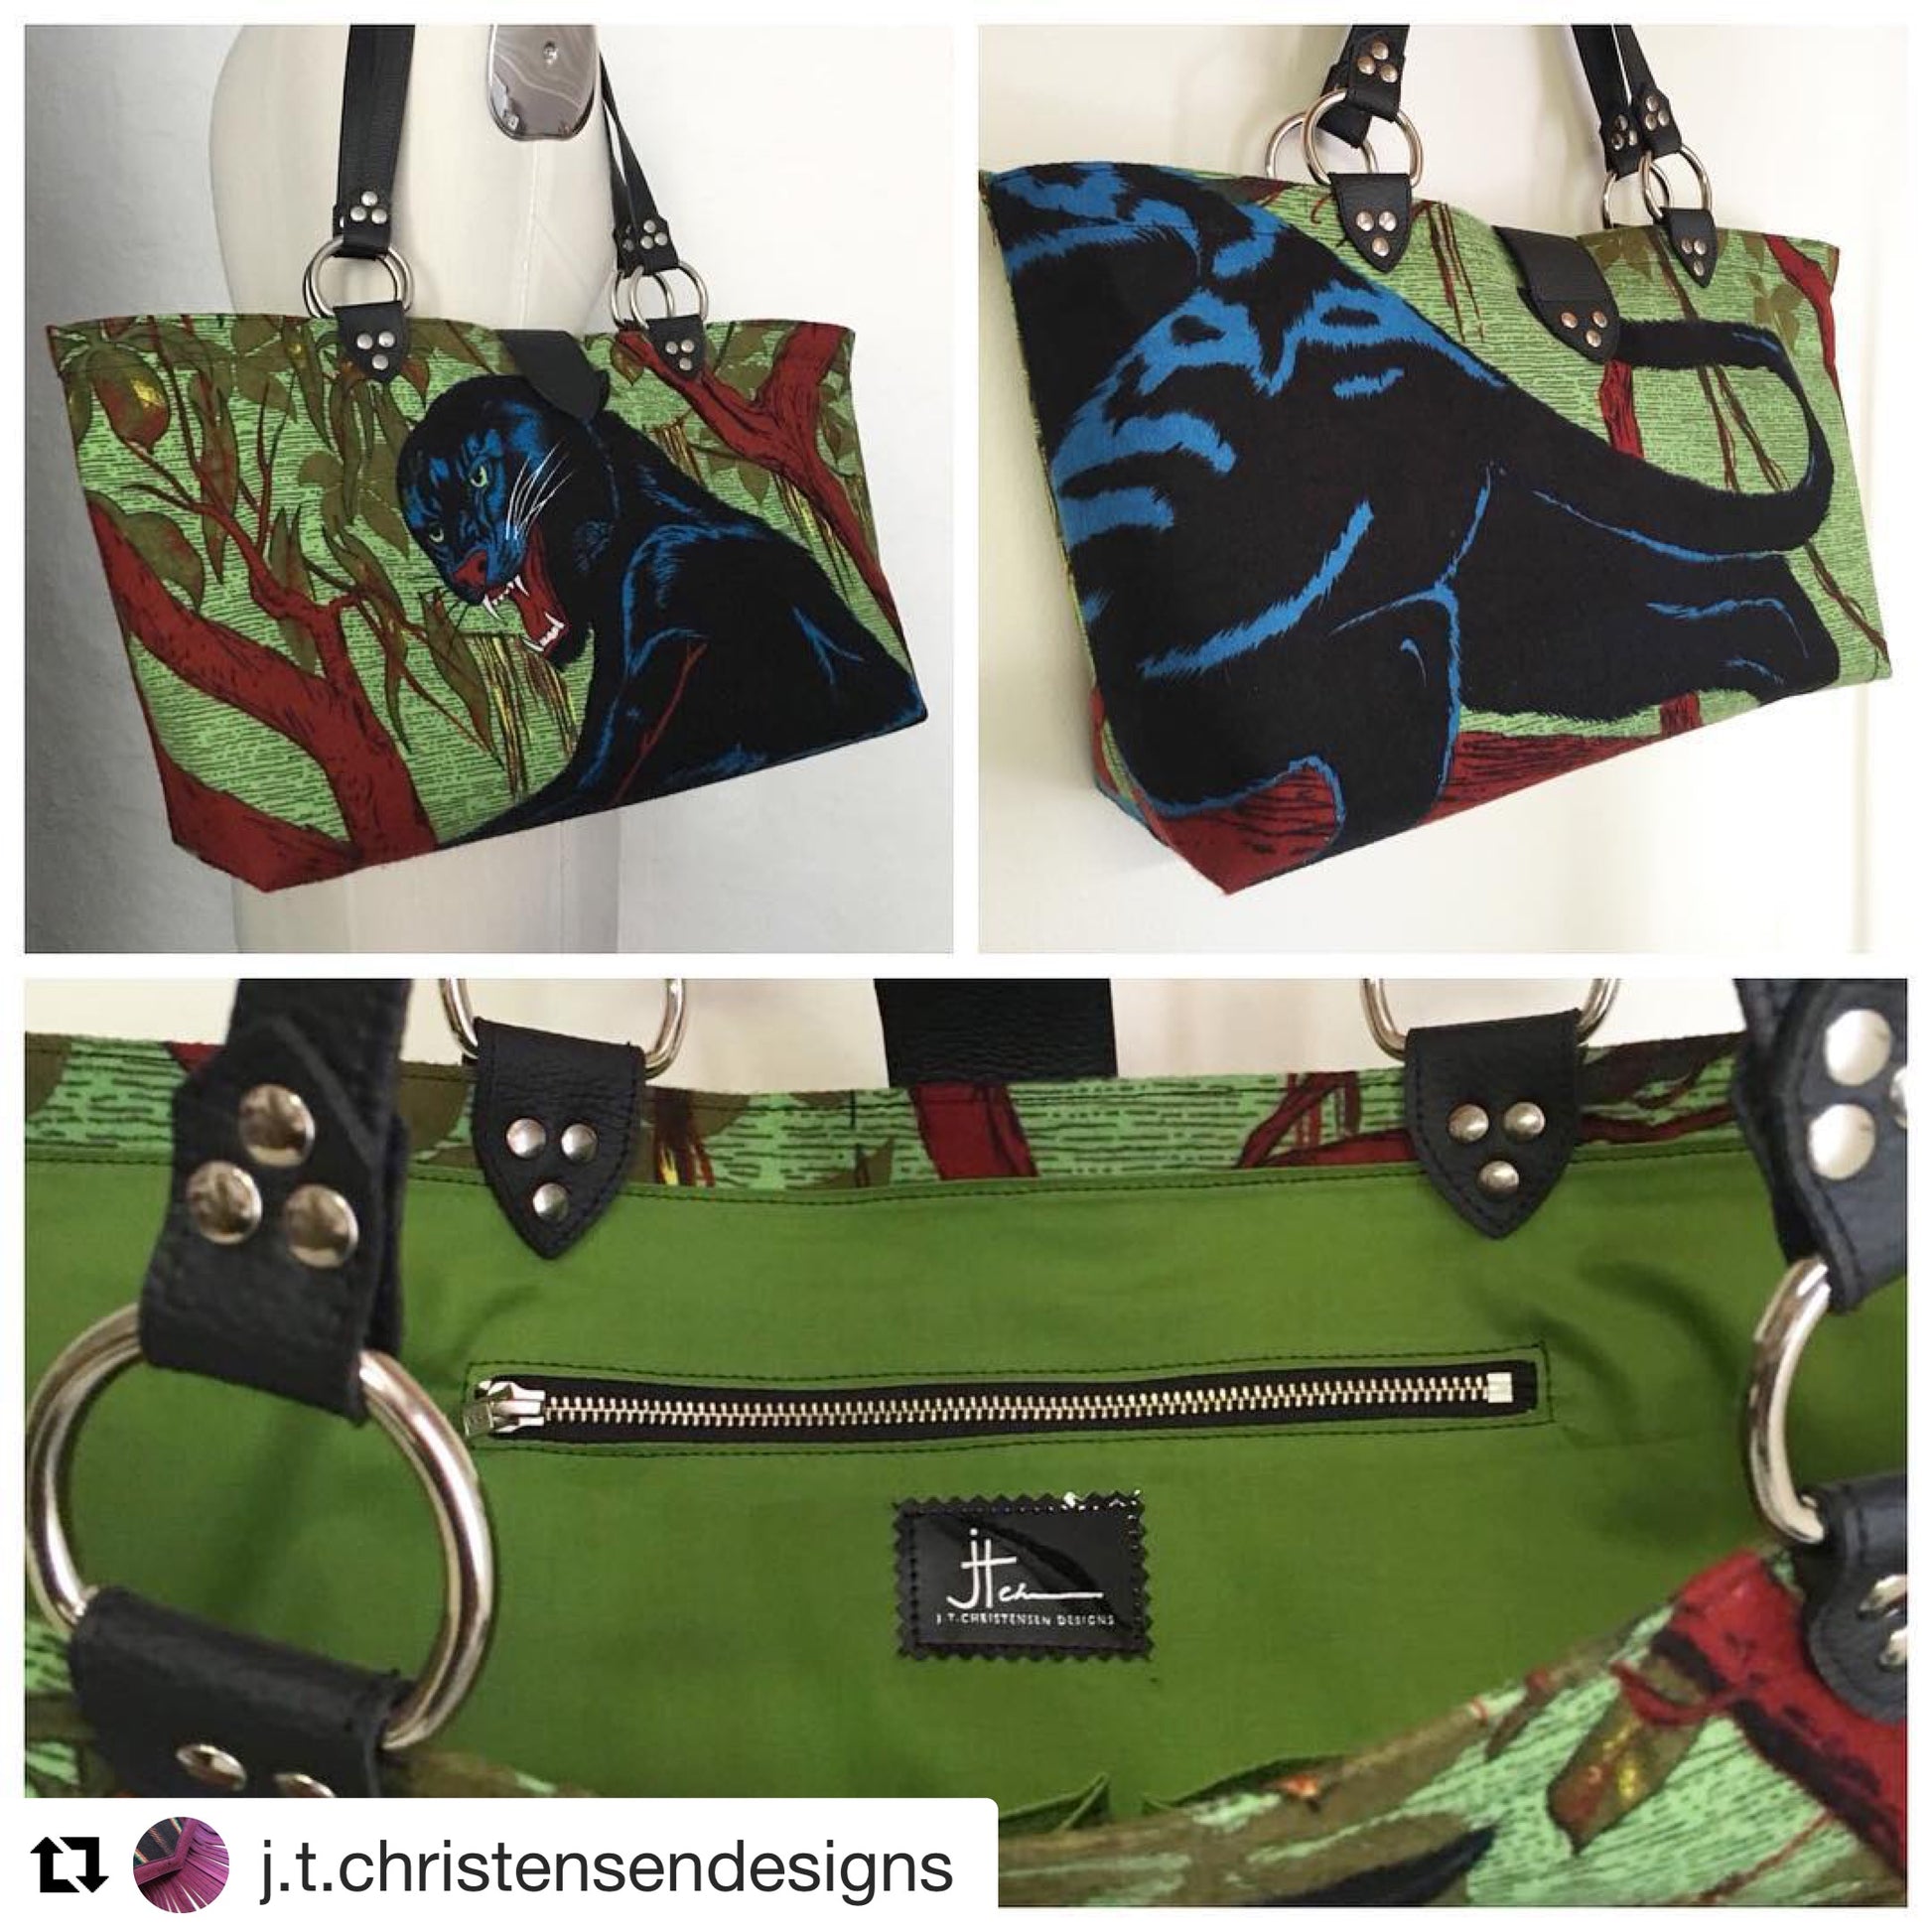 Limited Edition Panther Open Tote with Olive Green Cotton Lining measuring 17" Across At Bottom (21.5" Across At Top) x 10.5" Tall x 5" Wide (43 cm At Bottom / 54.5 cm At Top x 26.5 cm Tall x 12.5 cm Wide) with 20” (51cm) vinyl tote straps. Inside an open divided pocket with signature J.T. Christensen Label and zipper pocket with hidden serial number. Ships from Sweden.